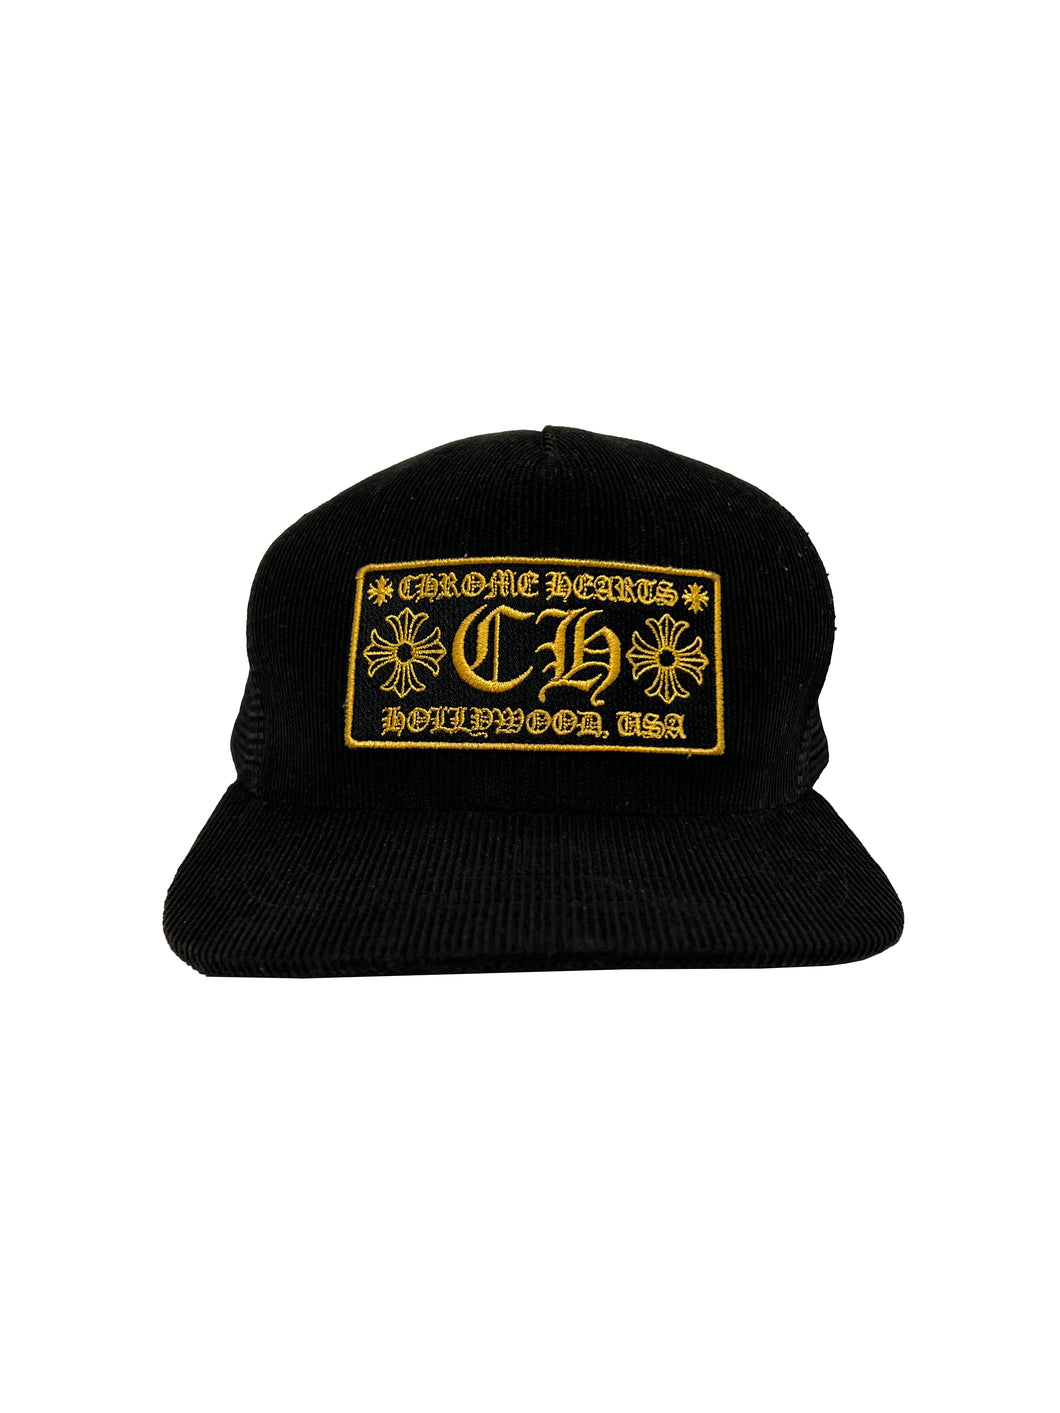 Chrome Hearts Corduroy Black and Yellow Hat